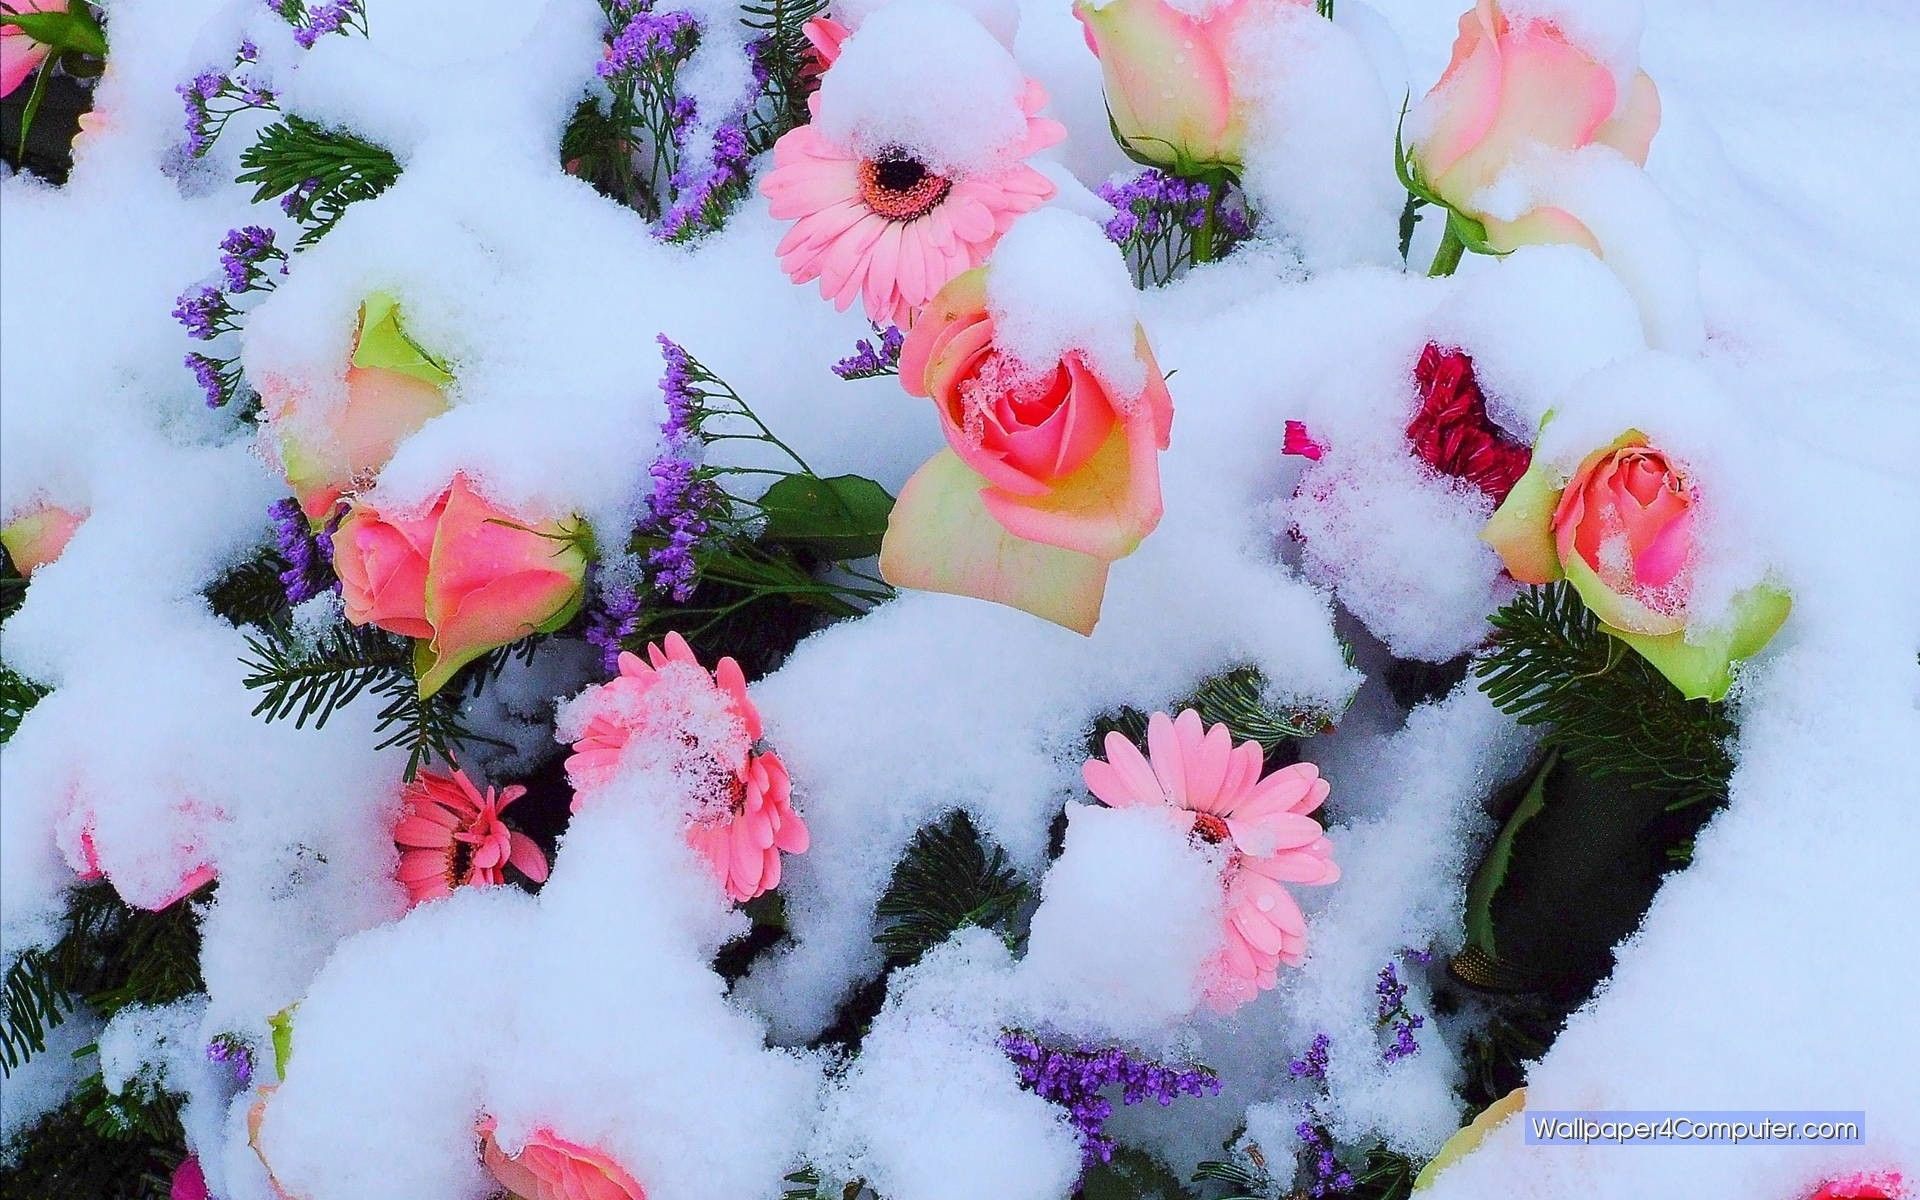 Buy Decorative Winter Flower Snow Freeze On Flower Ice Cold Plant  Garden Nature Wallpaper Sticker for Fridge Décor Online at Low Prices in  India  Amazonin